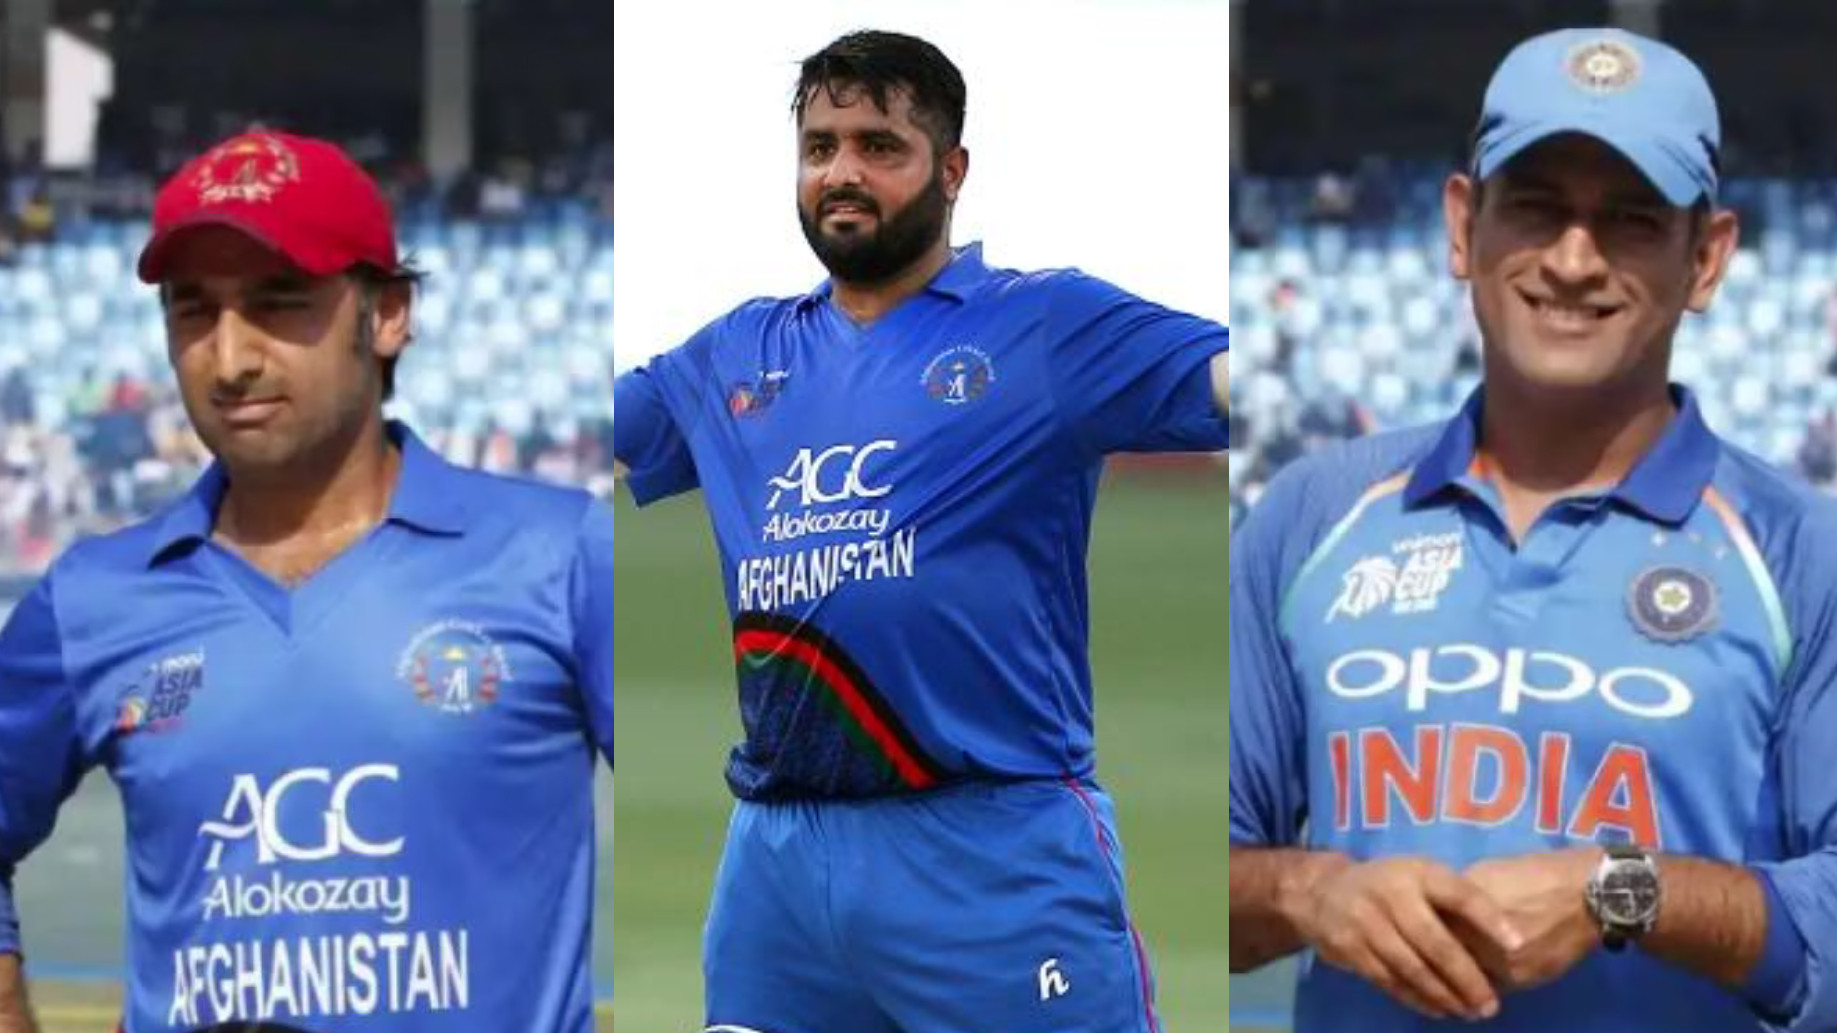 “I’ll pick him in IPL”- Asghar Afghan recalls funny chat with MS Dhoni involving Mohammad Shahzad  